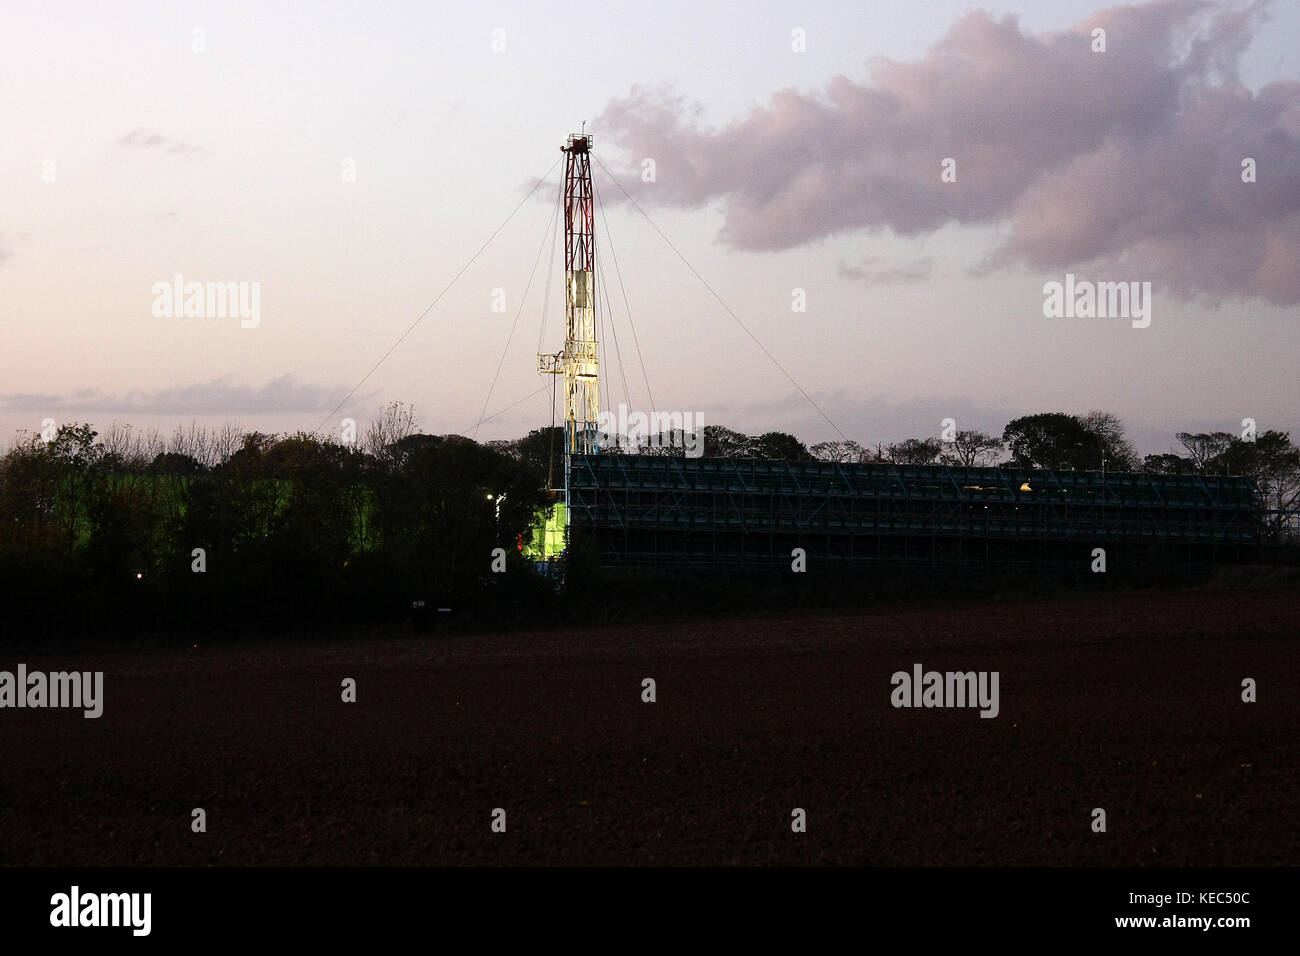 York, North Yorkshire, UK. 15th Oct, 2017. A Hydraulic Fracking Rig some hundred yards from Anti-Fracking protests and owned by ''Third Energy'' starts its evening operating lights as night draws in across the fields.Two Anti-Fracking protestors from the Kirby-Misperton Anti-Fracking camp in North Yorkshire were arrested shortly after they ended a 24 hour lock-on to a wooden tower which blocked the main gate of Fracking Company ''Third Energy'' in North Yorkshire. Heavily outnumbered by North Yorks Police the protestors defied heavy handed and obstructive tactics towards both Stock Photo